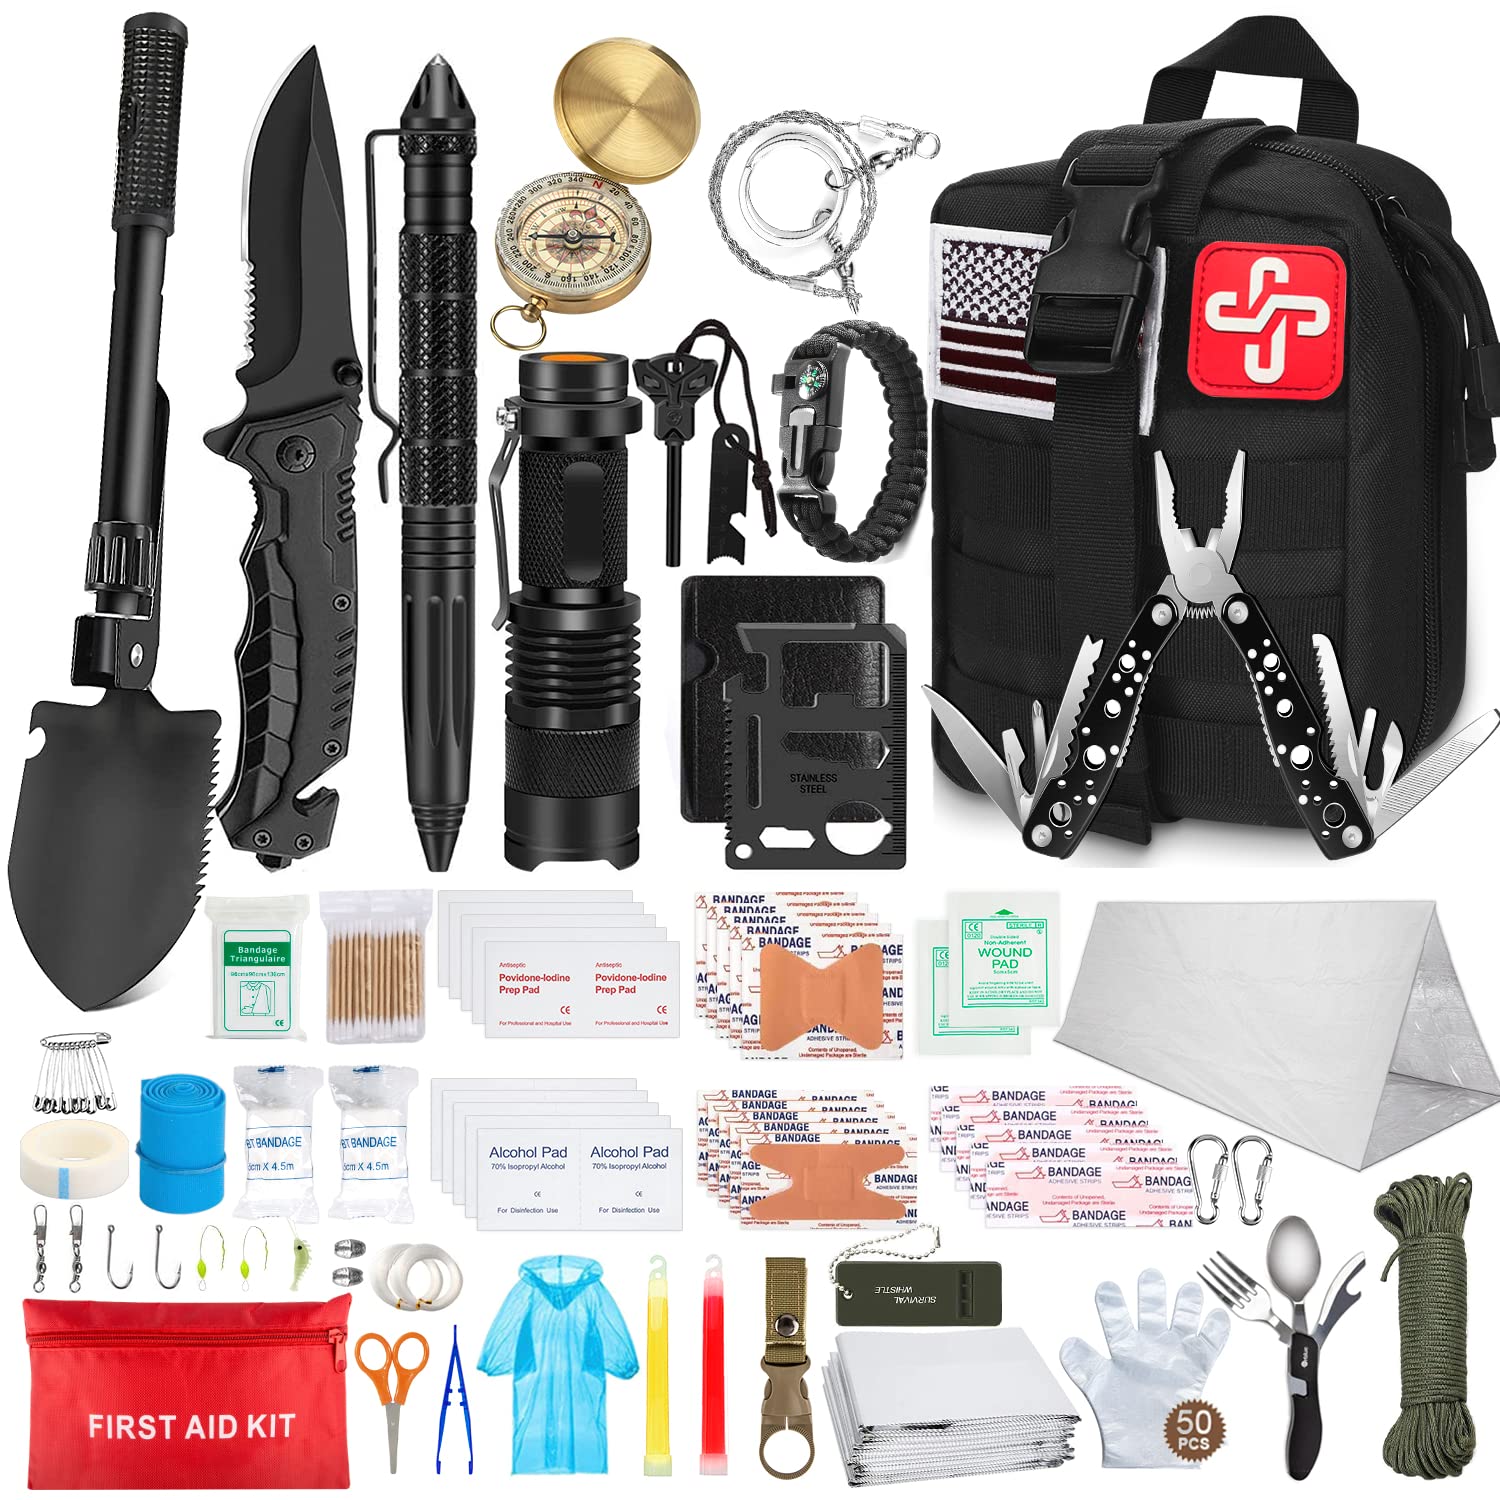 EMFACAMP Survival Kit and First Aid Kit - Survival Gear and Equipment – Bug  Out Bag Survival Kit - Camping Accessories with Axe, Shovel, Knife –